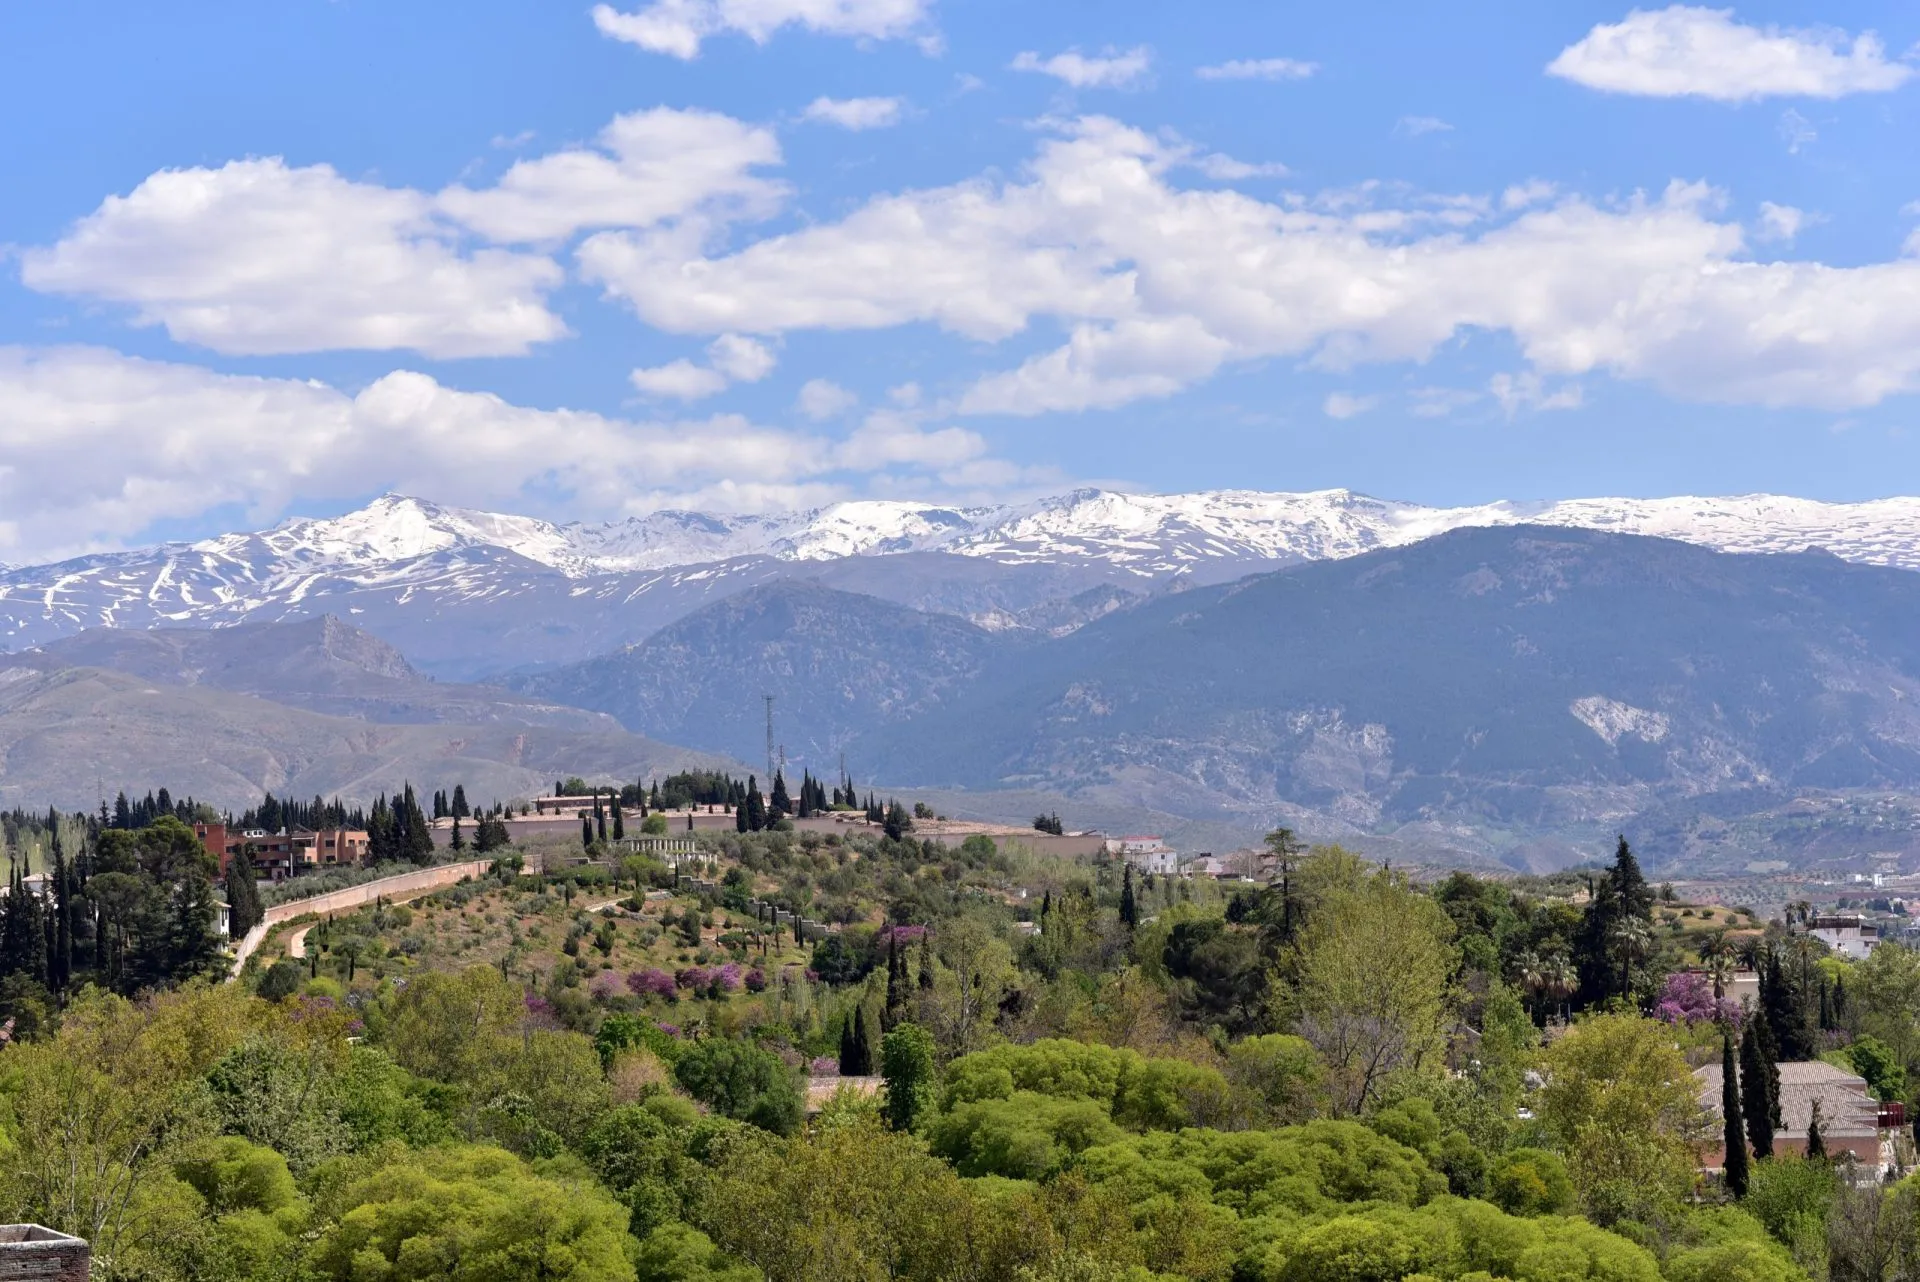 The Sierra Nevada as seen from the Alhambra plateau in Granada, Andalusia, Spain